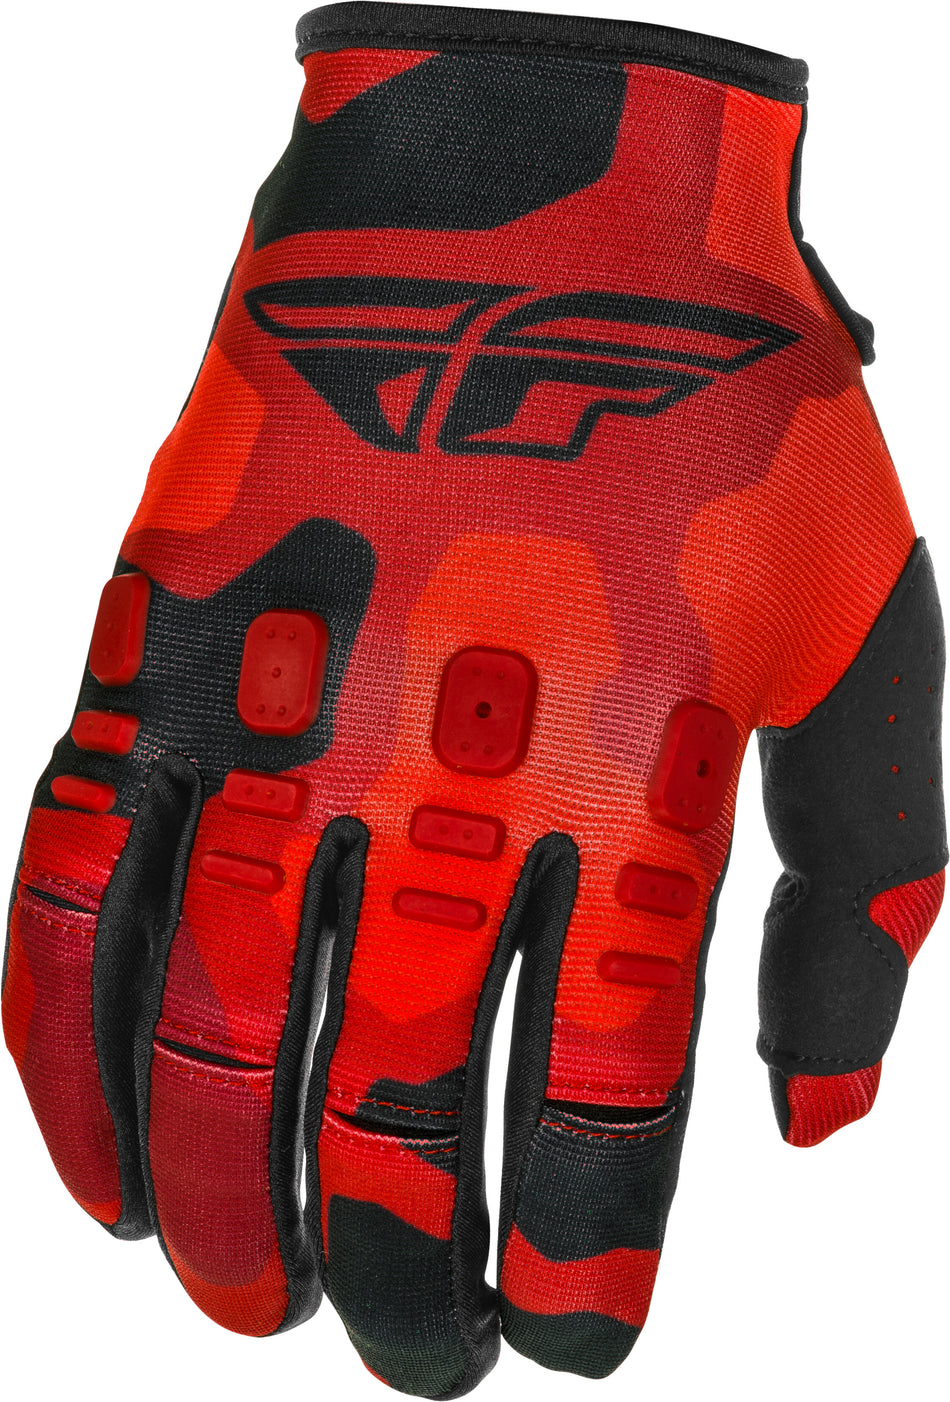 FLY RACING Youth Kinetic K221 Gloves Red/Black Sz 04 374-51204